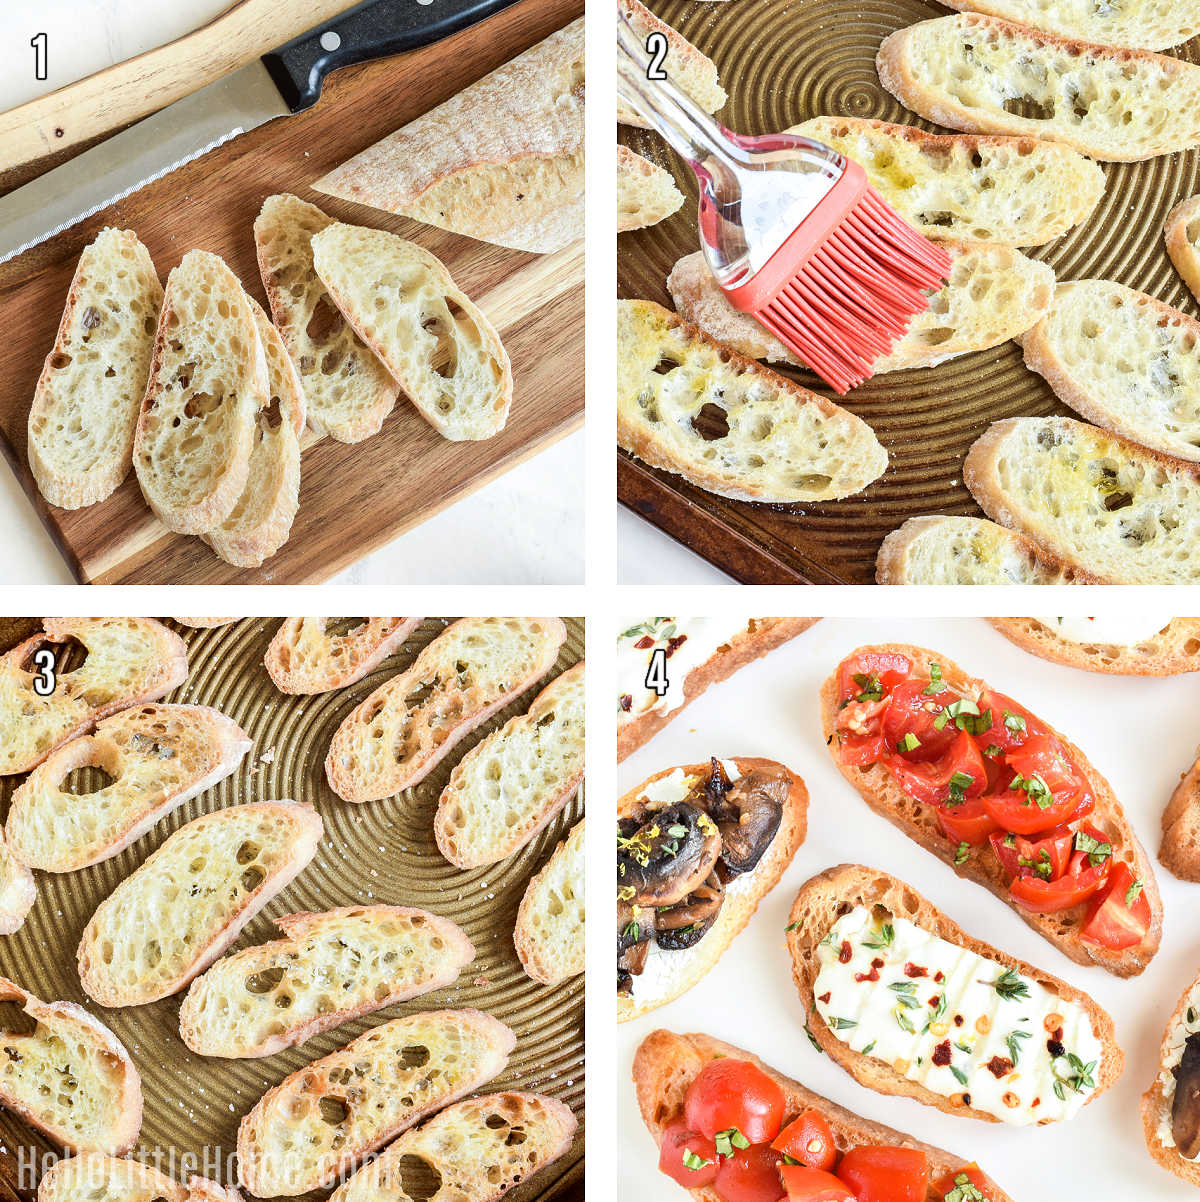 A photo collage showing how to make crostini step-by-step.